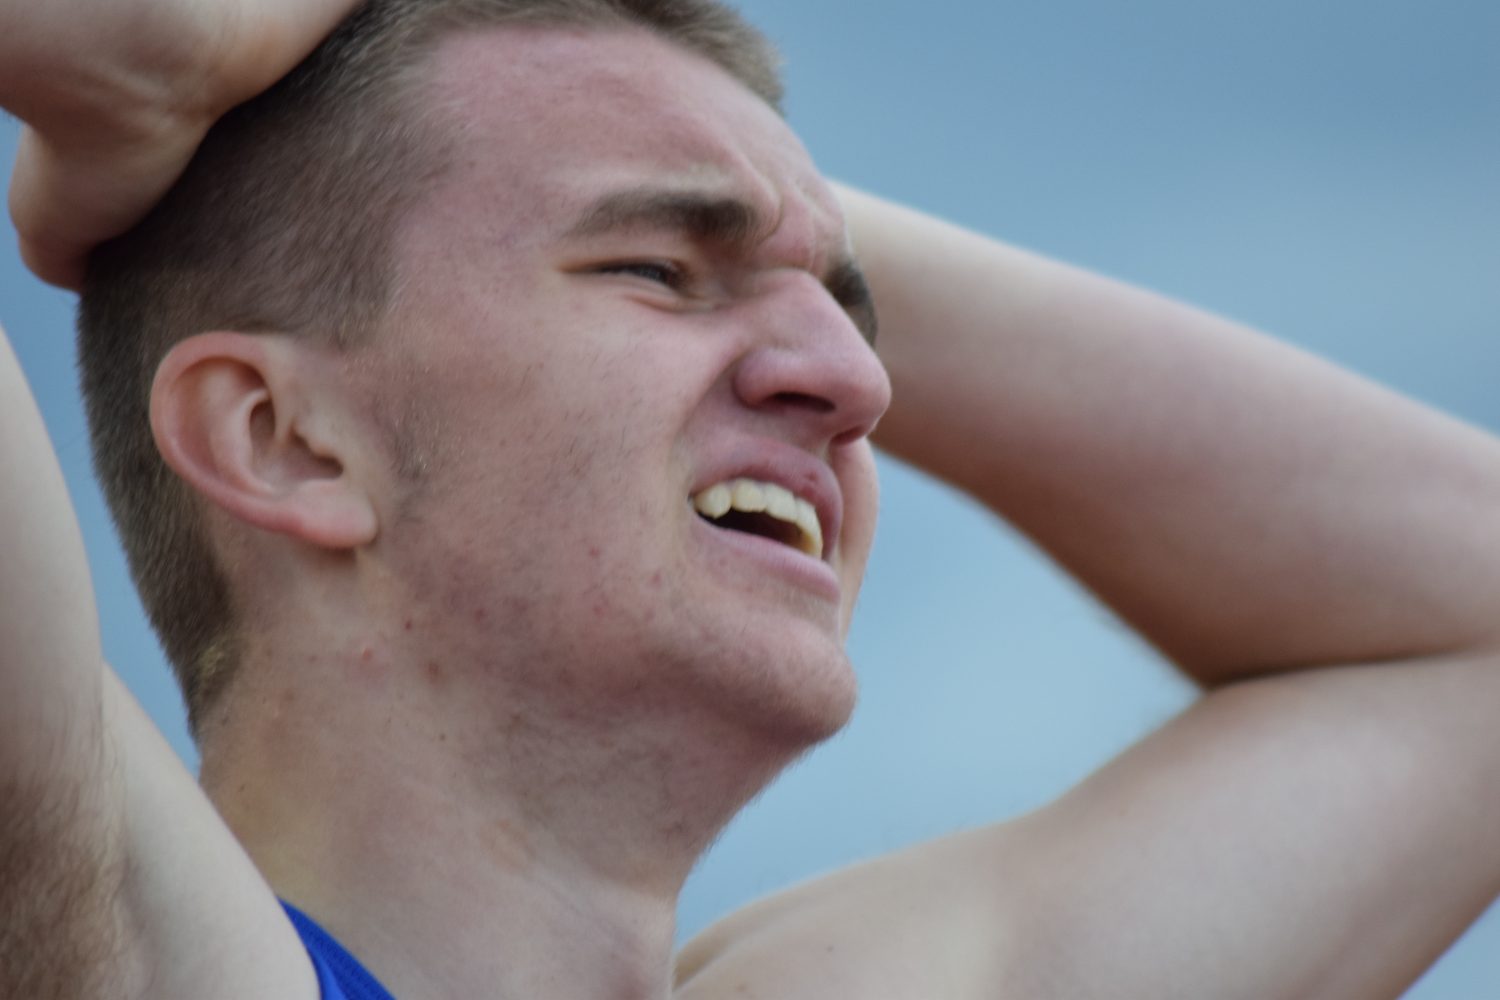 Auburndale sprinter Carver Empey reacts after running in the 400-meter dash at the 2016 WIAA State Track & Field Championships at the University of Wisconsin-La Crosse on June 3. He finished with a time of 53.40.